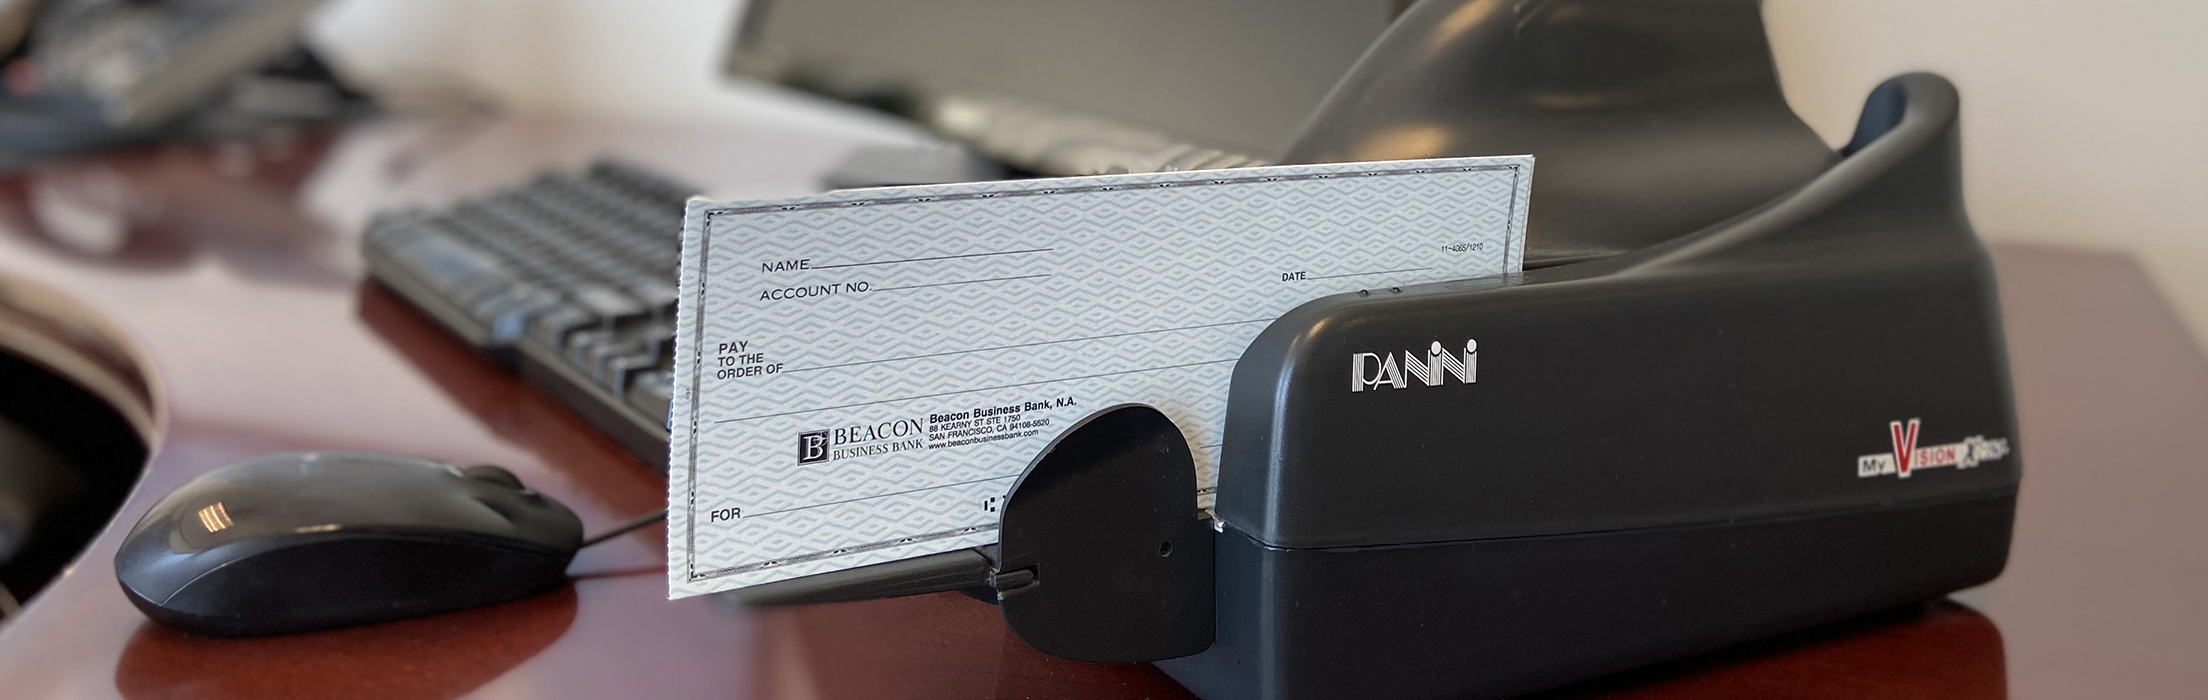 photo of a panini remote deposit check scanner on a desk